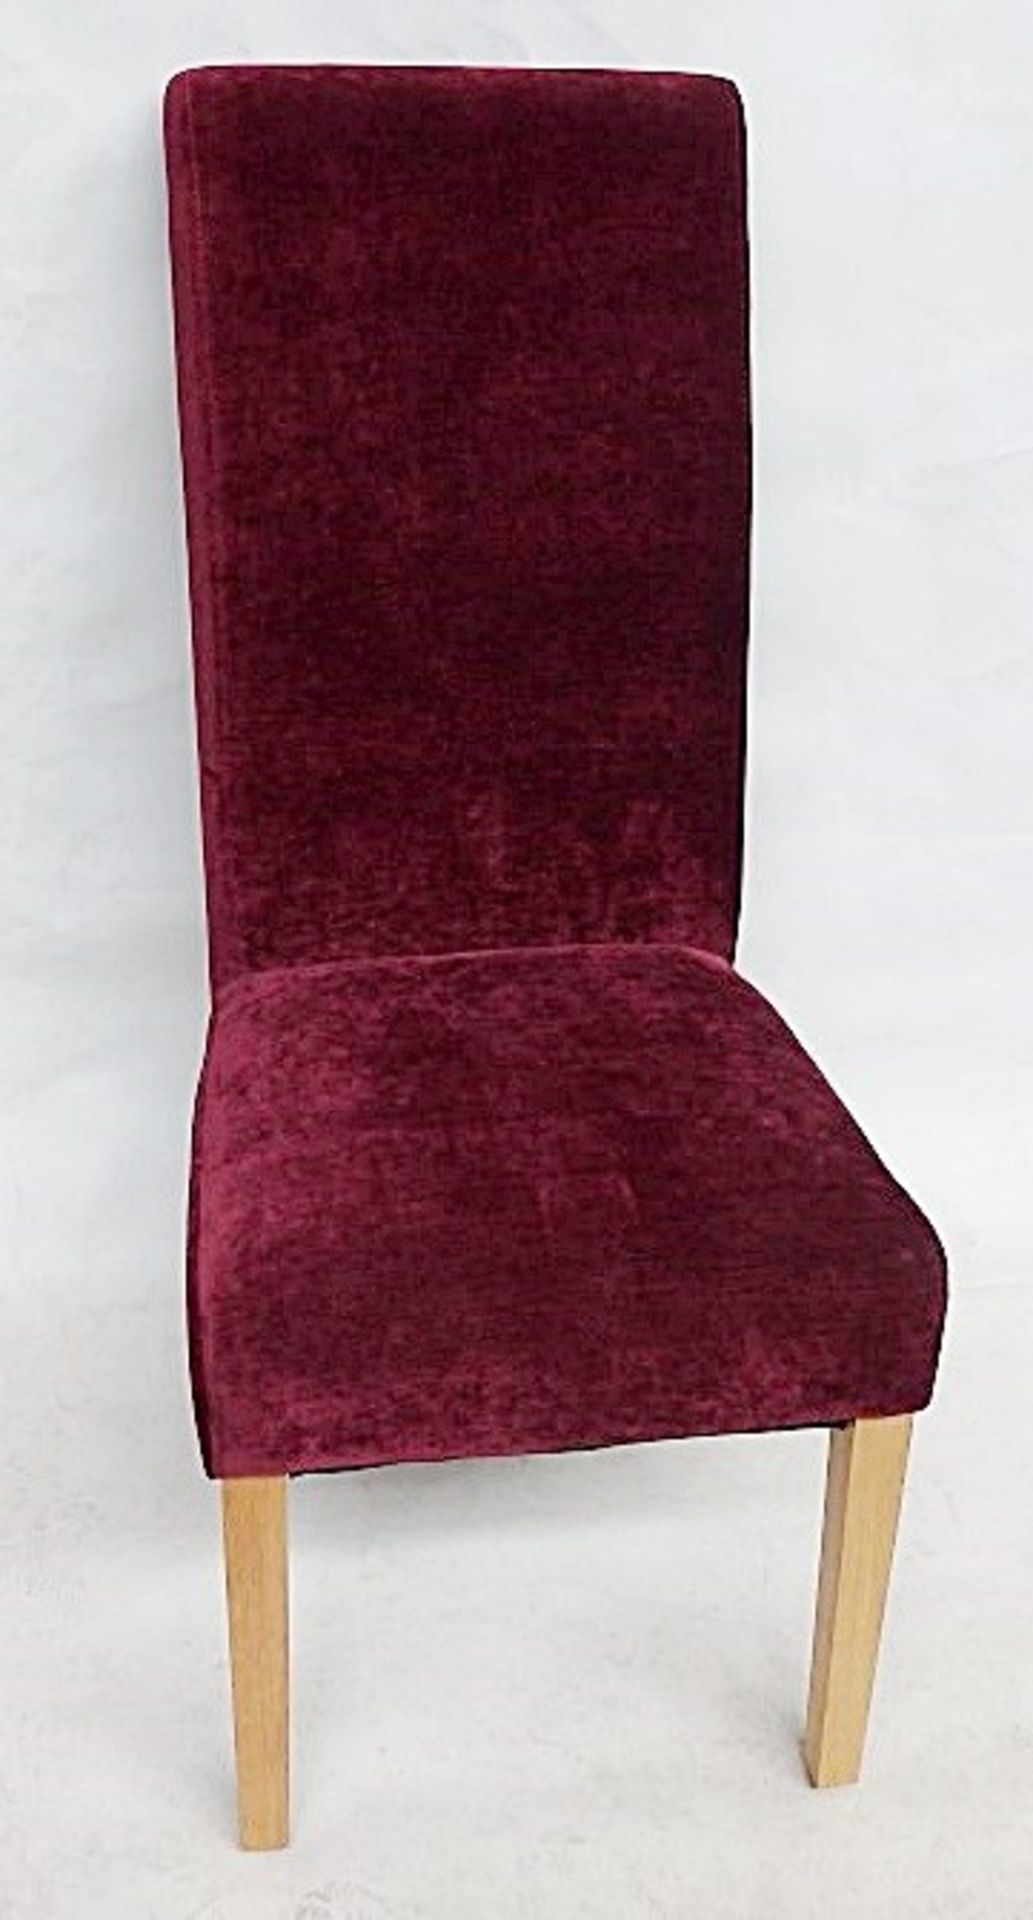 1 x Handcrafted High-back Dining Chair, Finished In A Rich Burgundy Chenille - Built & Upholstered - Image 2 of 4